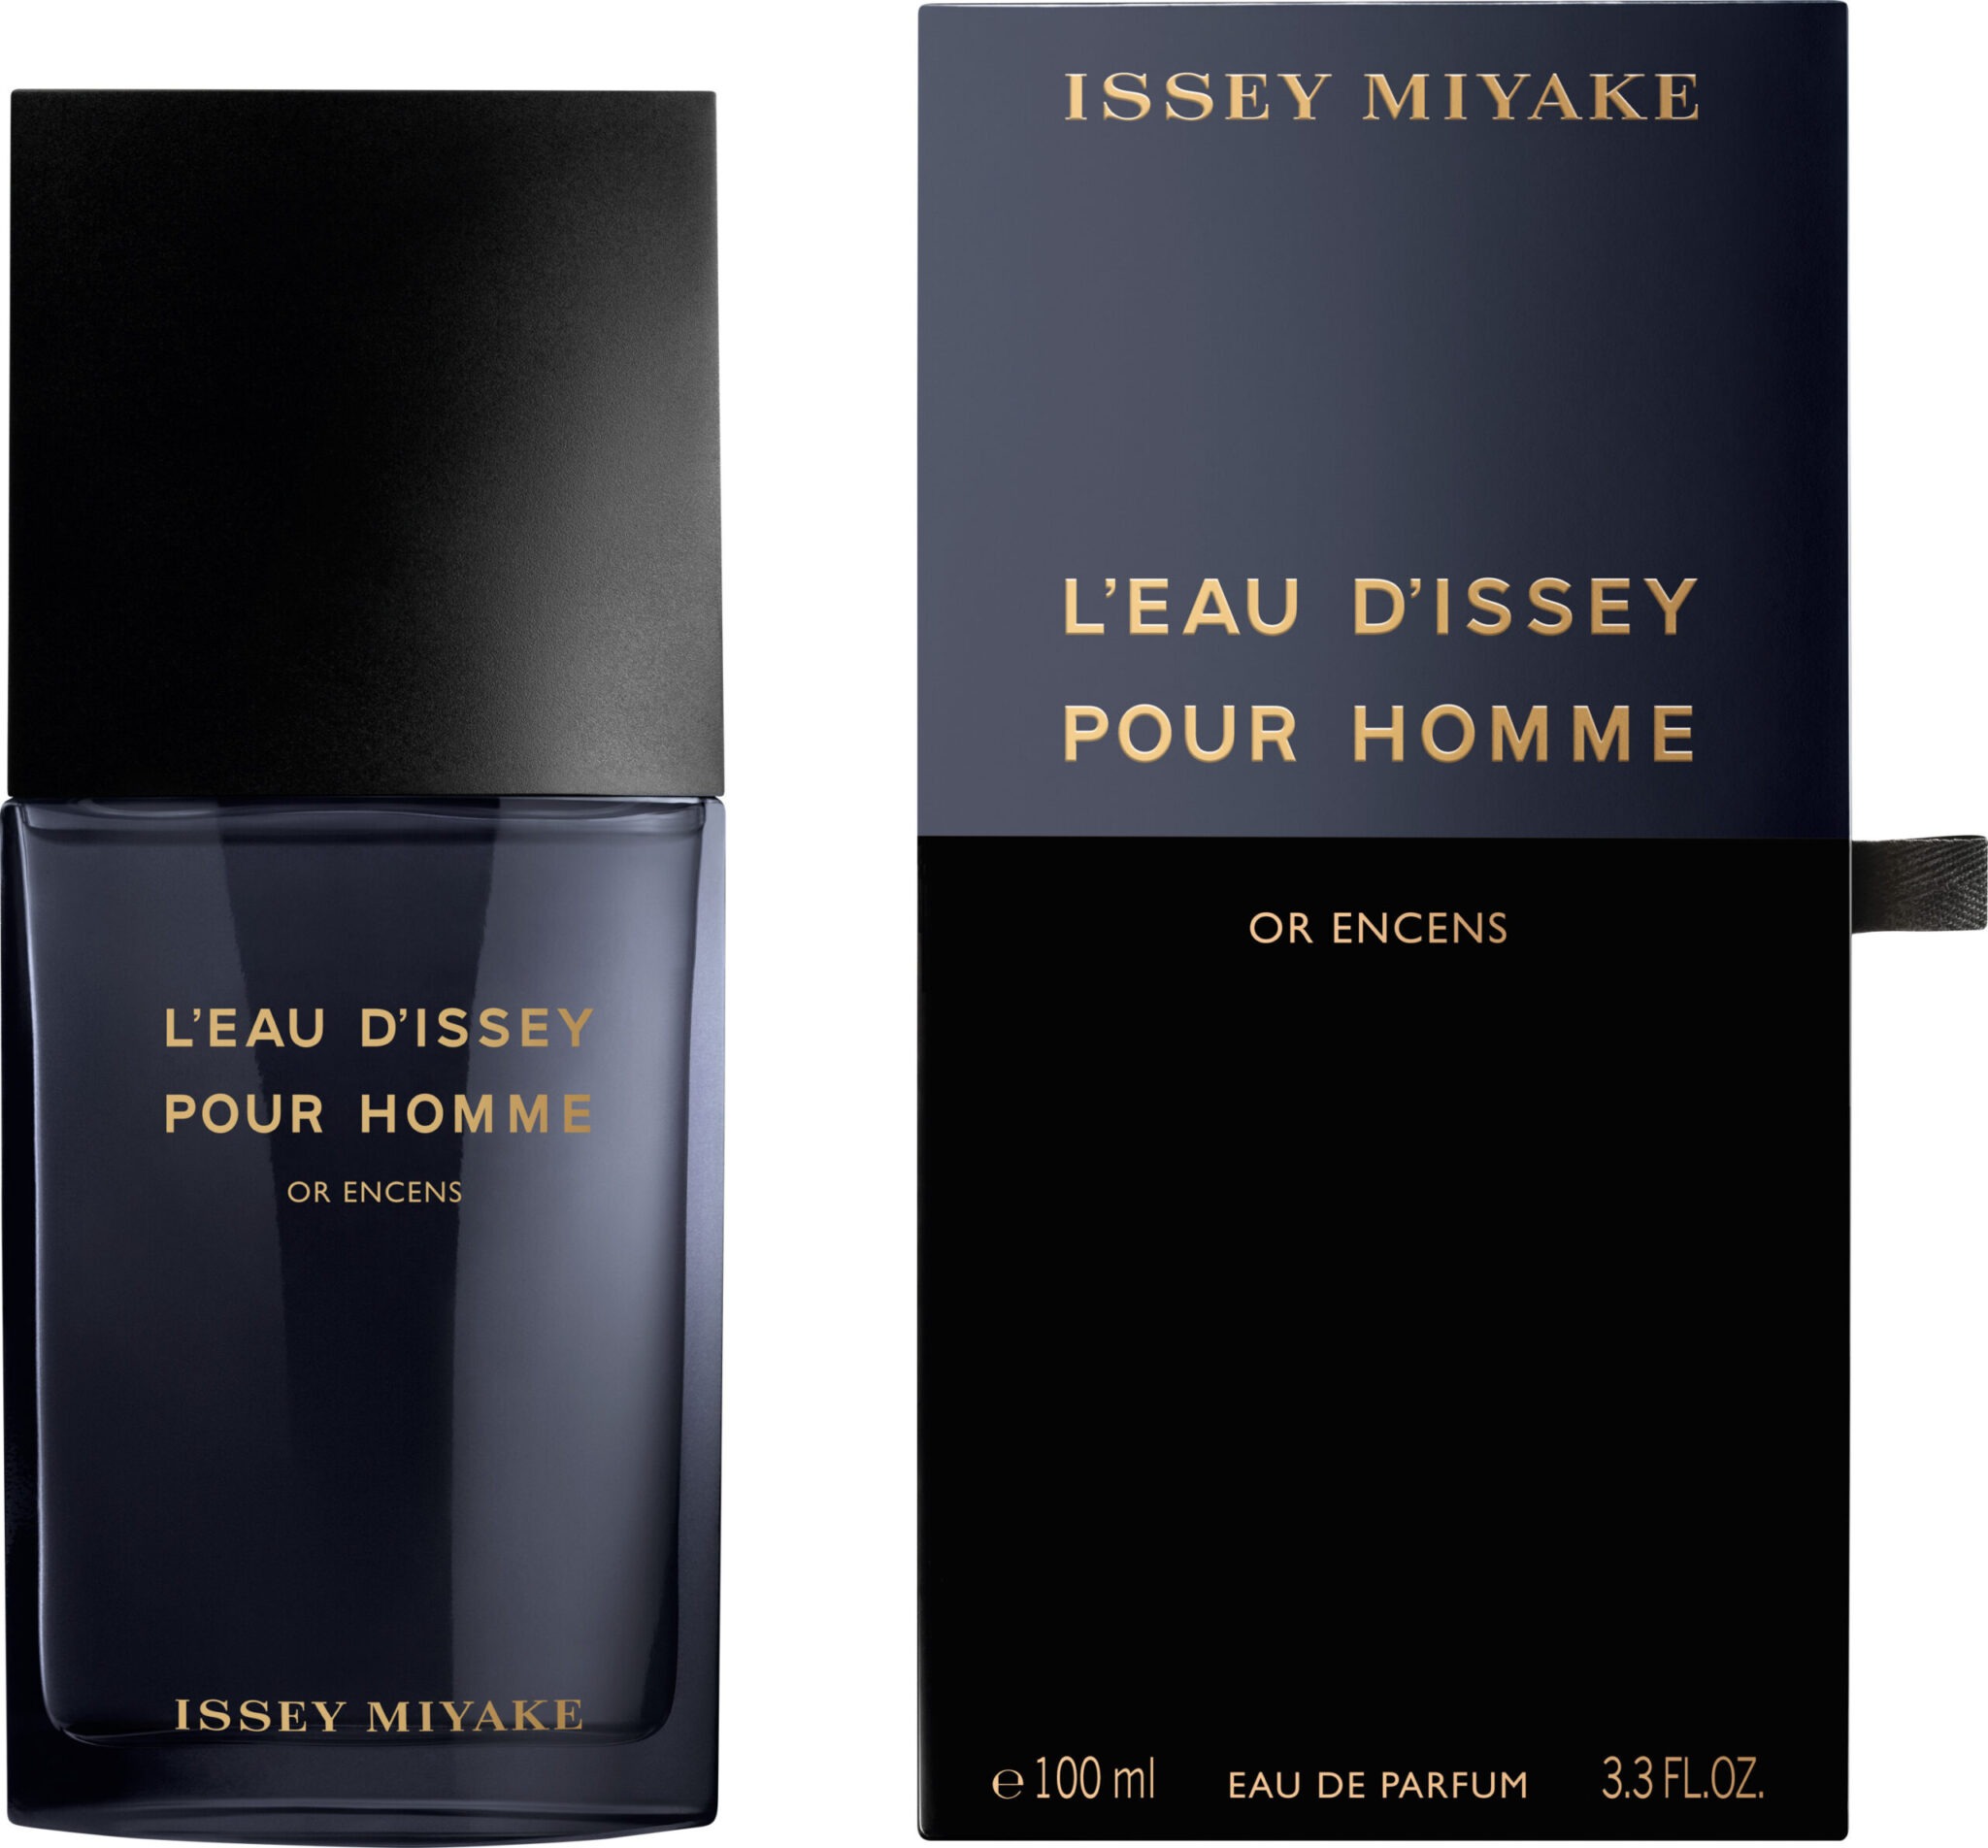 ISSEY MIYAKE L’EAU D’ISSEY OR ENCENS EDP 100 ML FOR MEN - Perfume ...